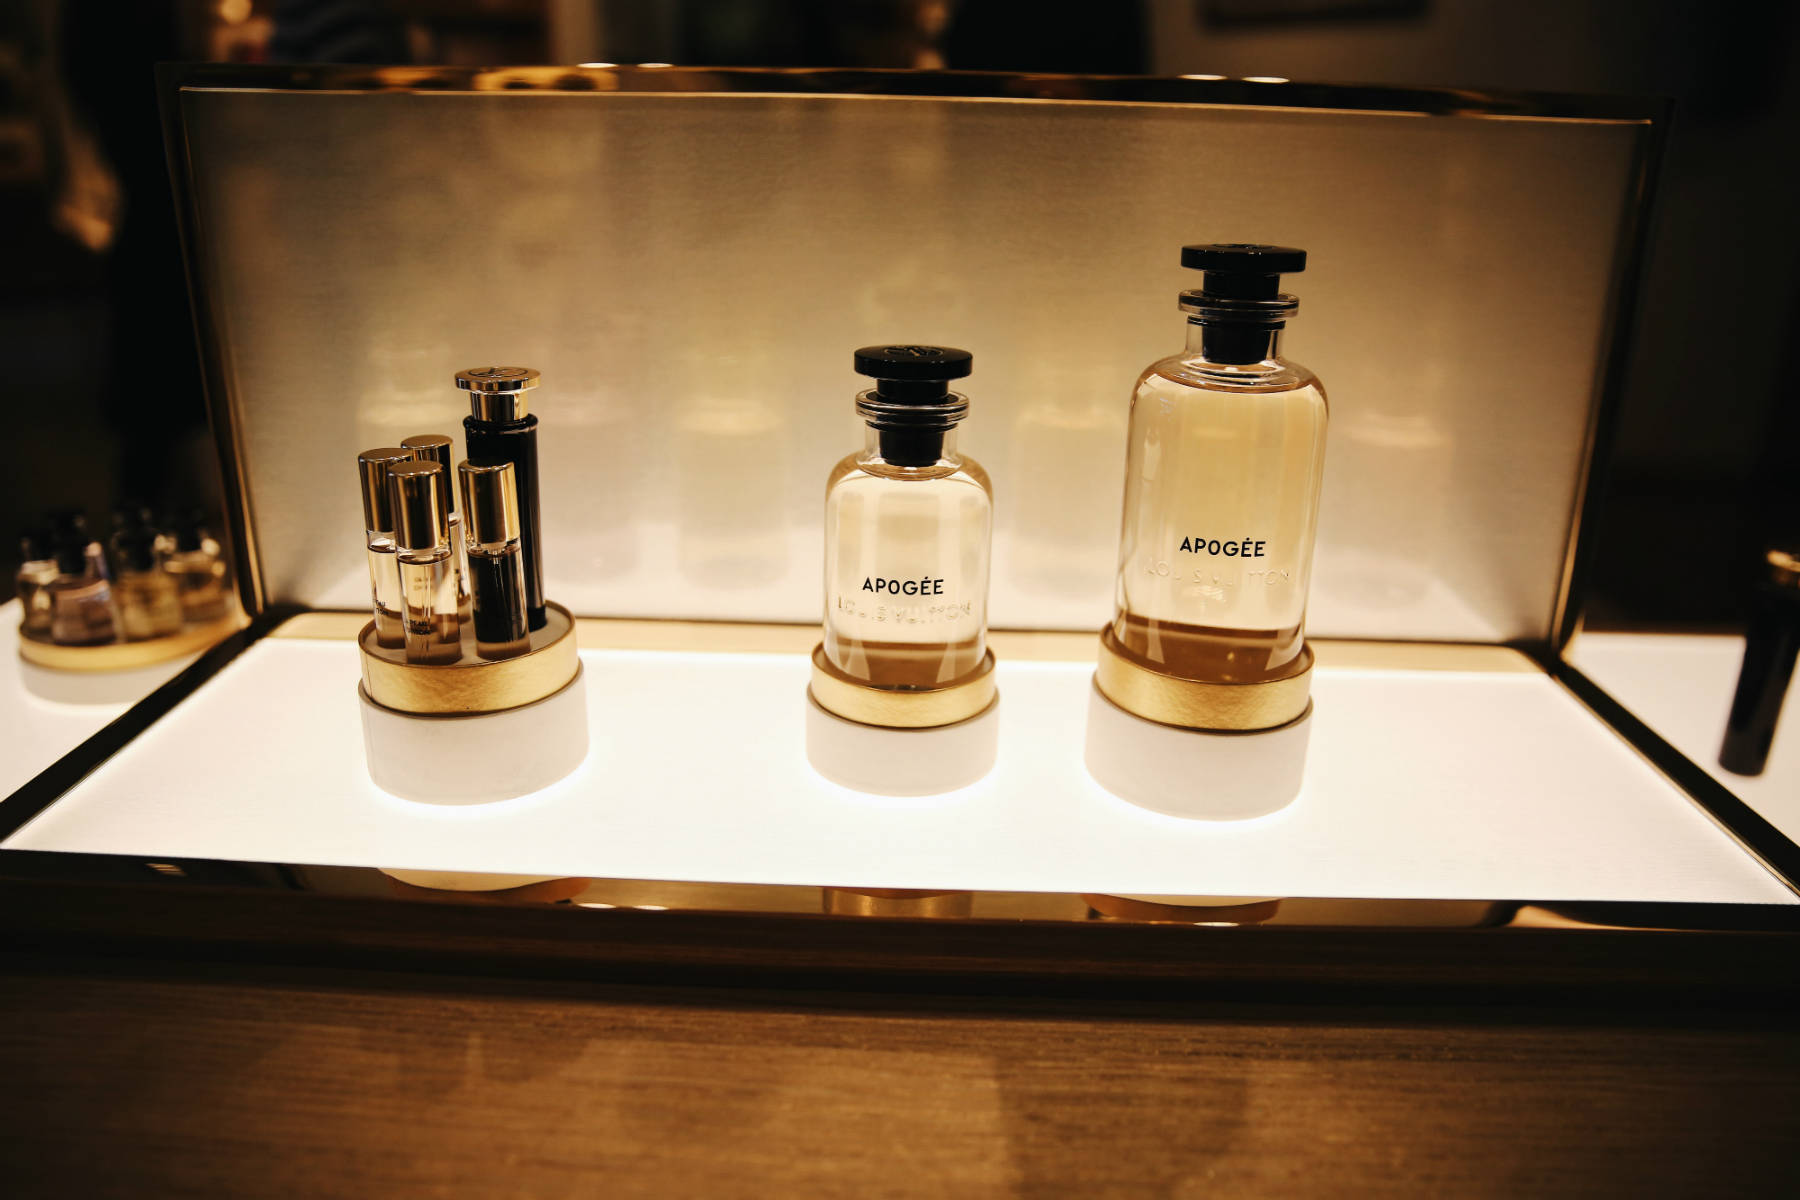 Louis Vuitton Apogee Perfume in a lighted display.